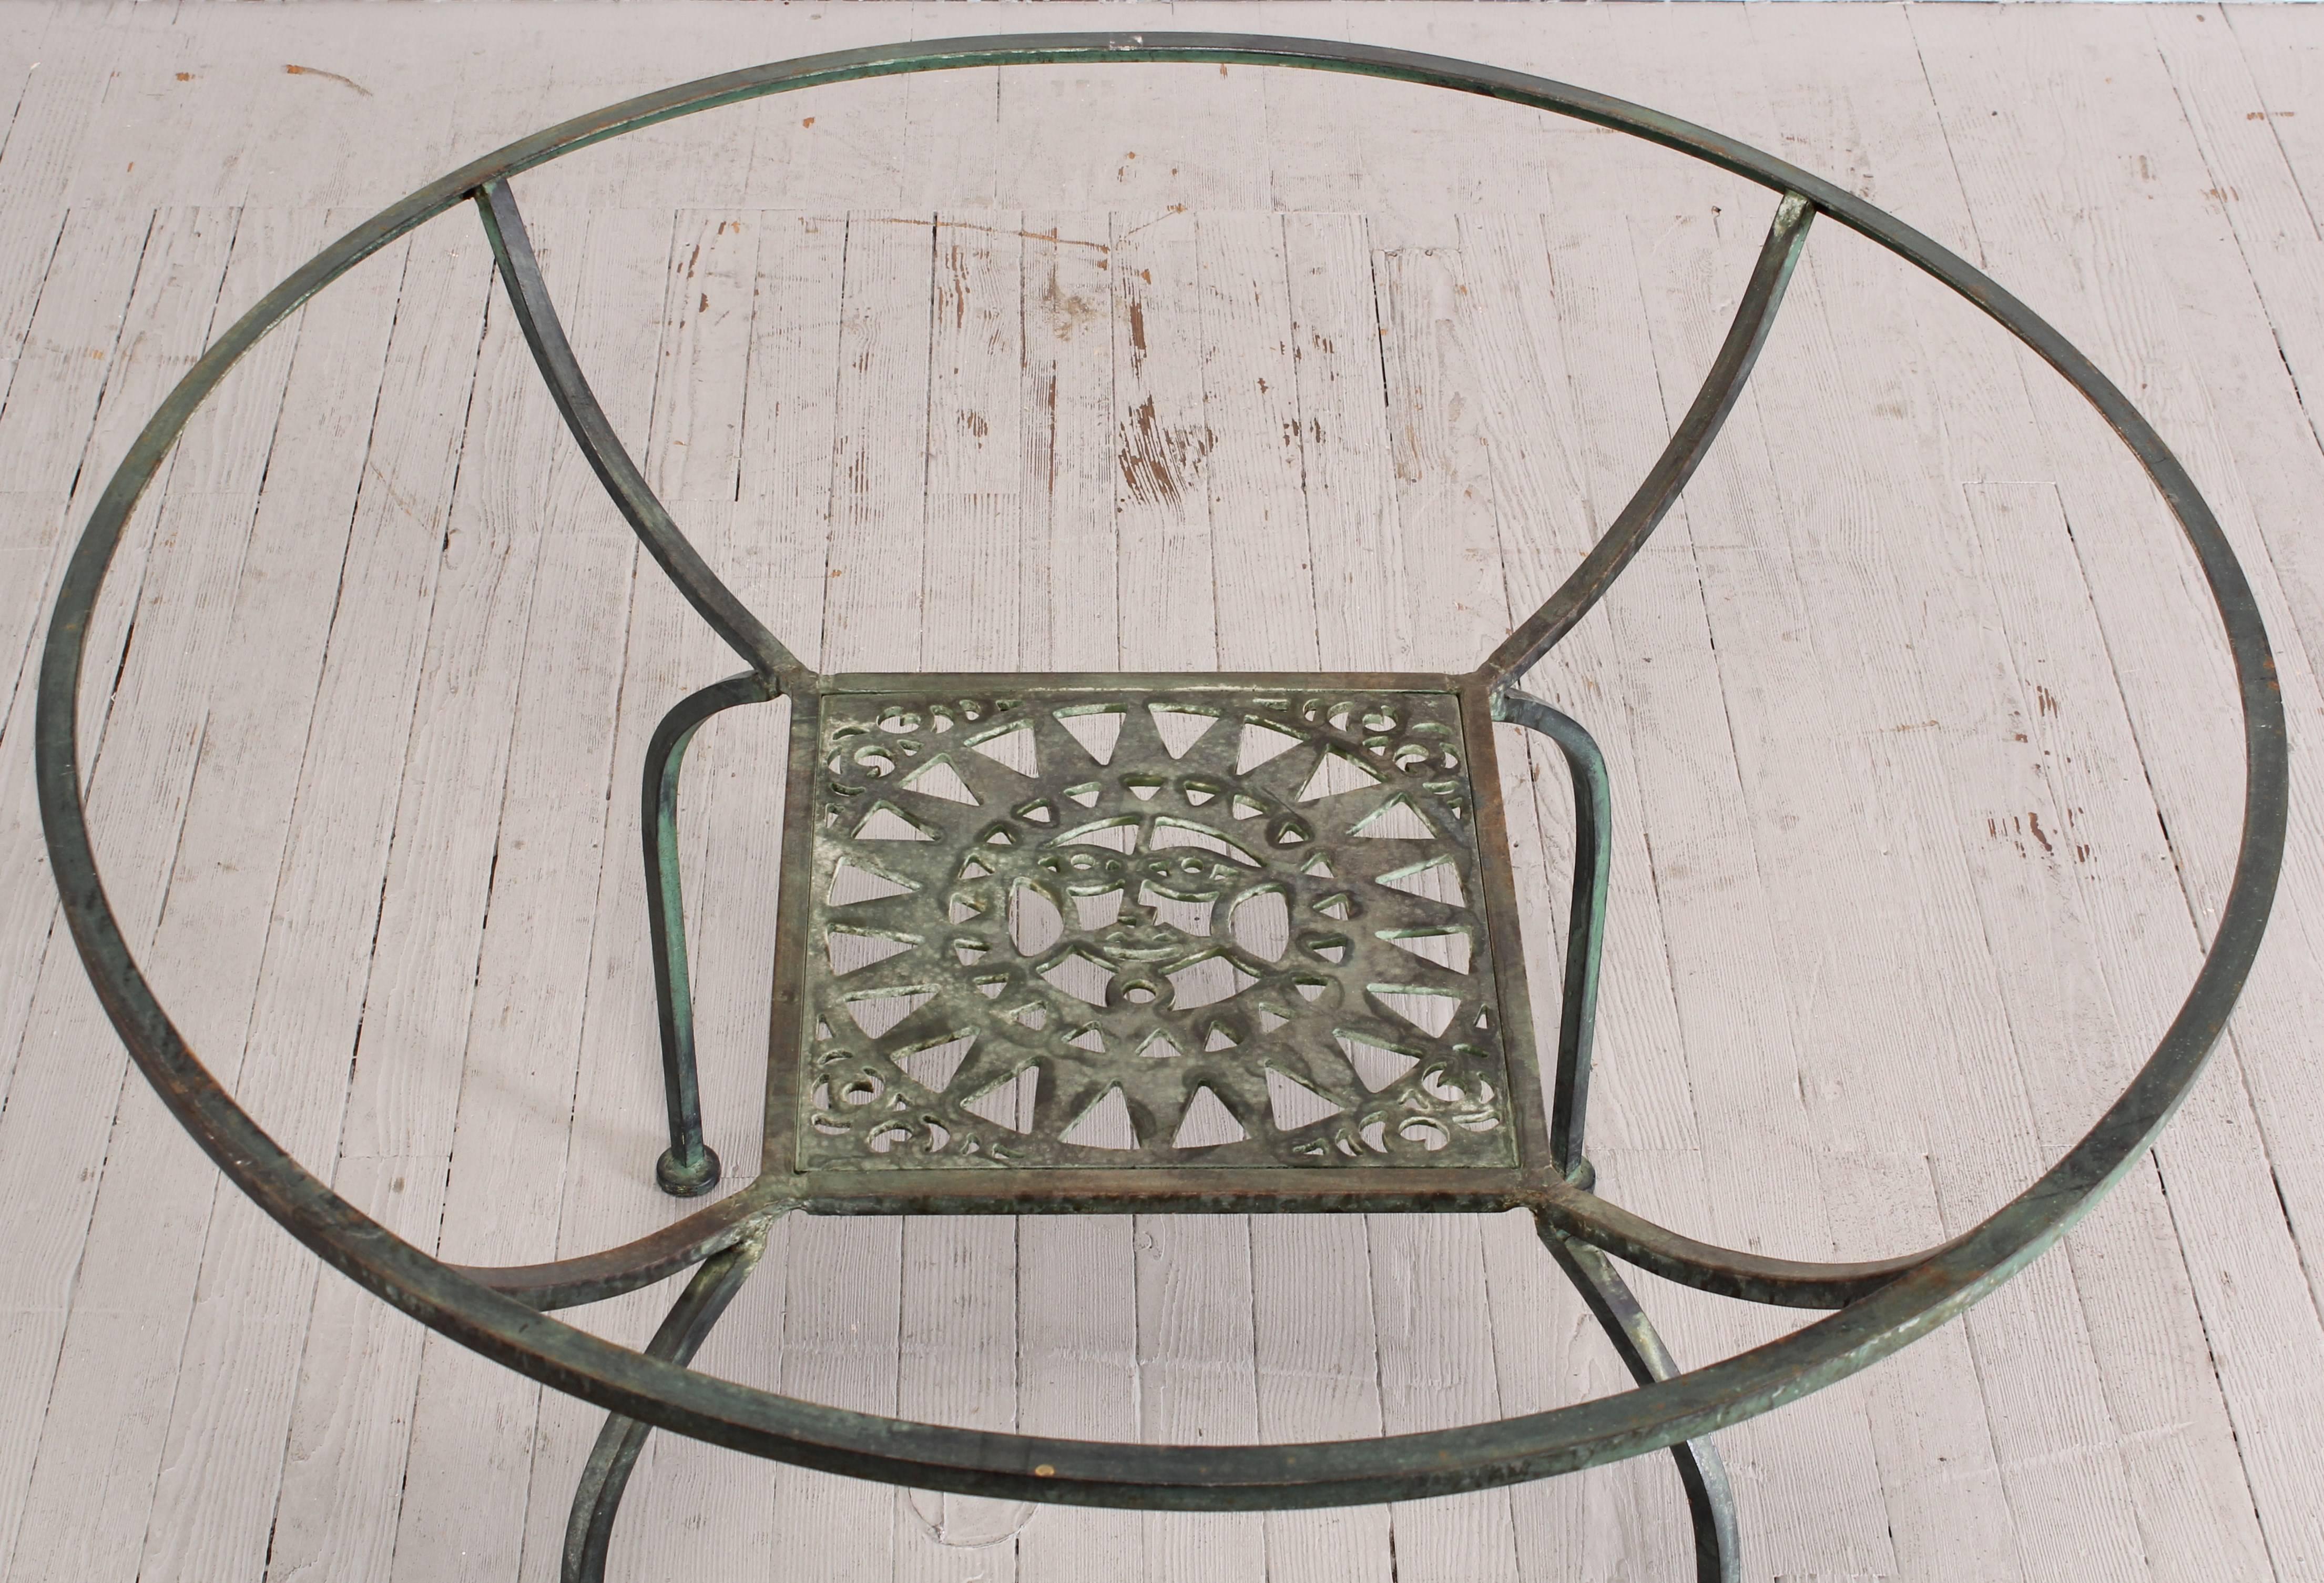 A beautiful painted verdigris seven-piece wrought iron patio set by Shaver-Howard, 1960. The chairs have a Greek key pattern motif and a sun face table. Dimension of chairs found below. Dimensions of table are 42